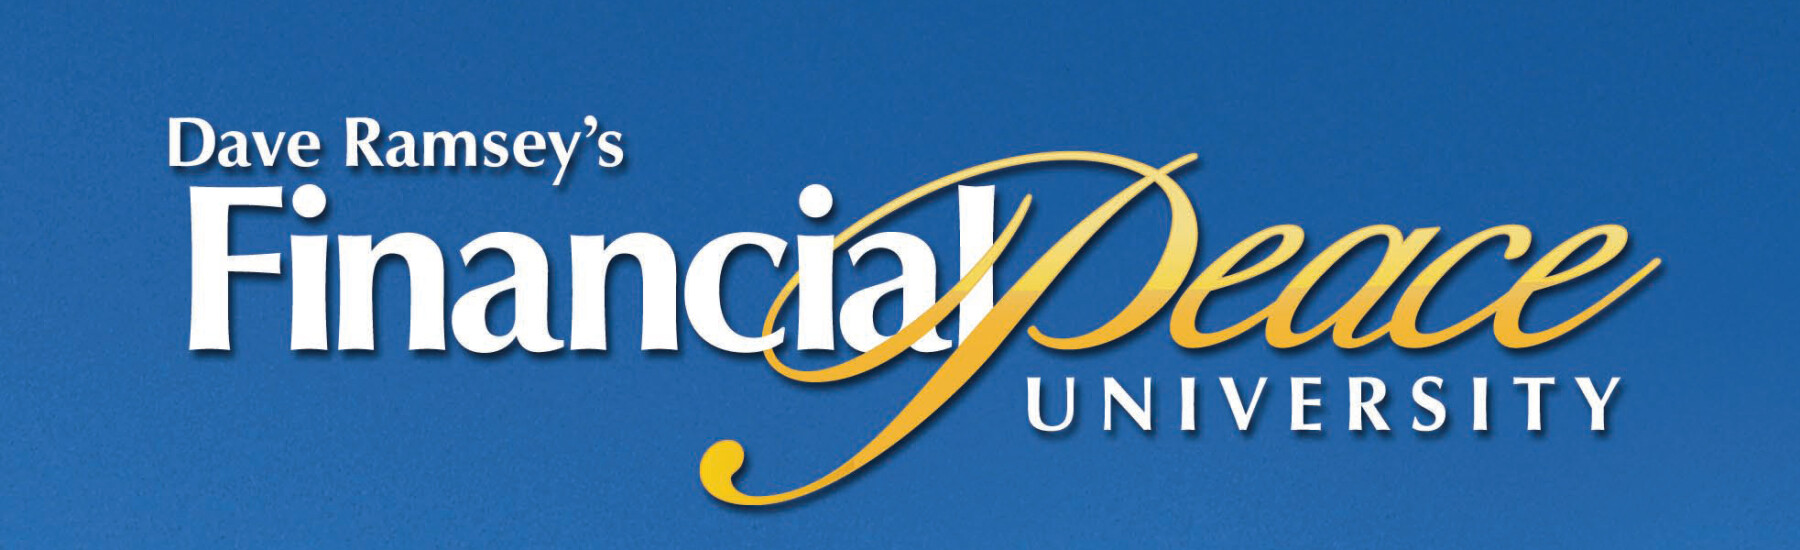 Dave Ramsey's "Financial Peace University"